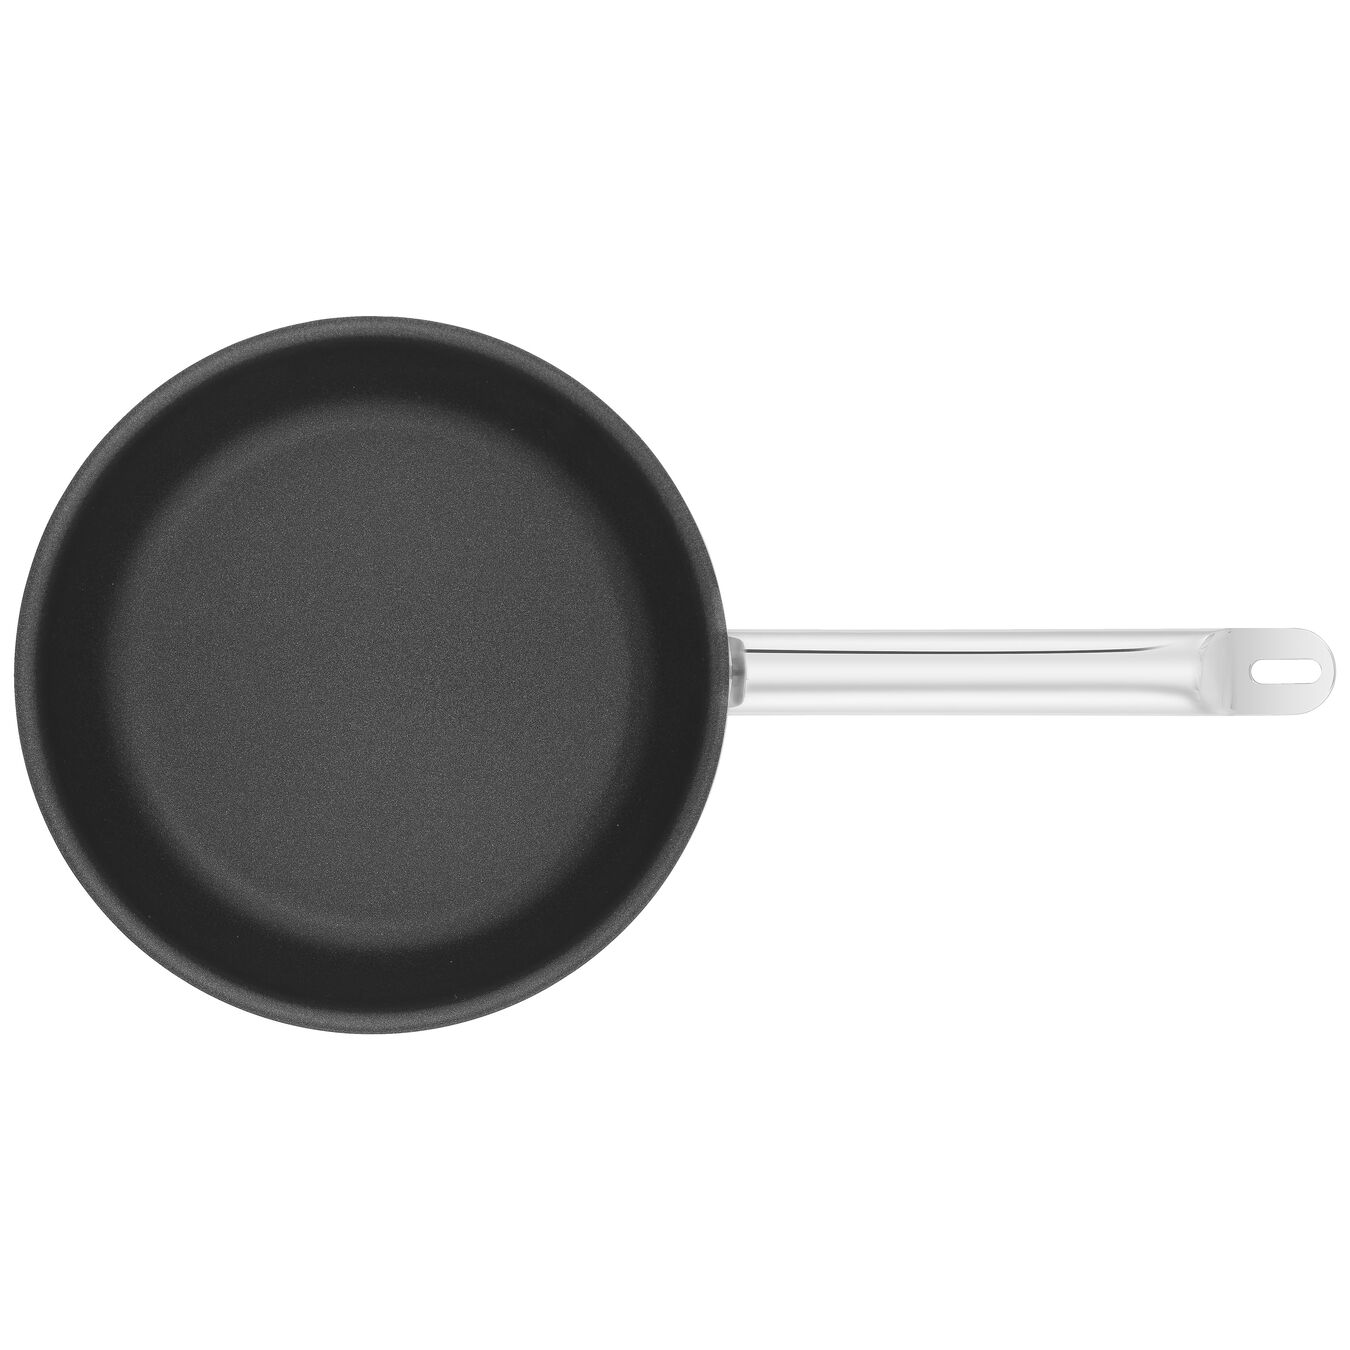 24 cm 18/10 Stainless Steel Frying pan,,large 5